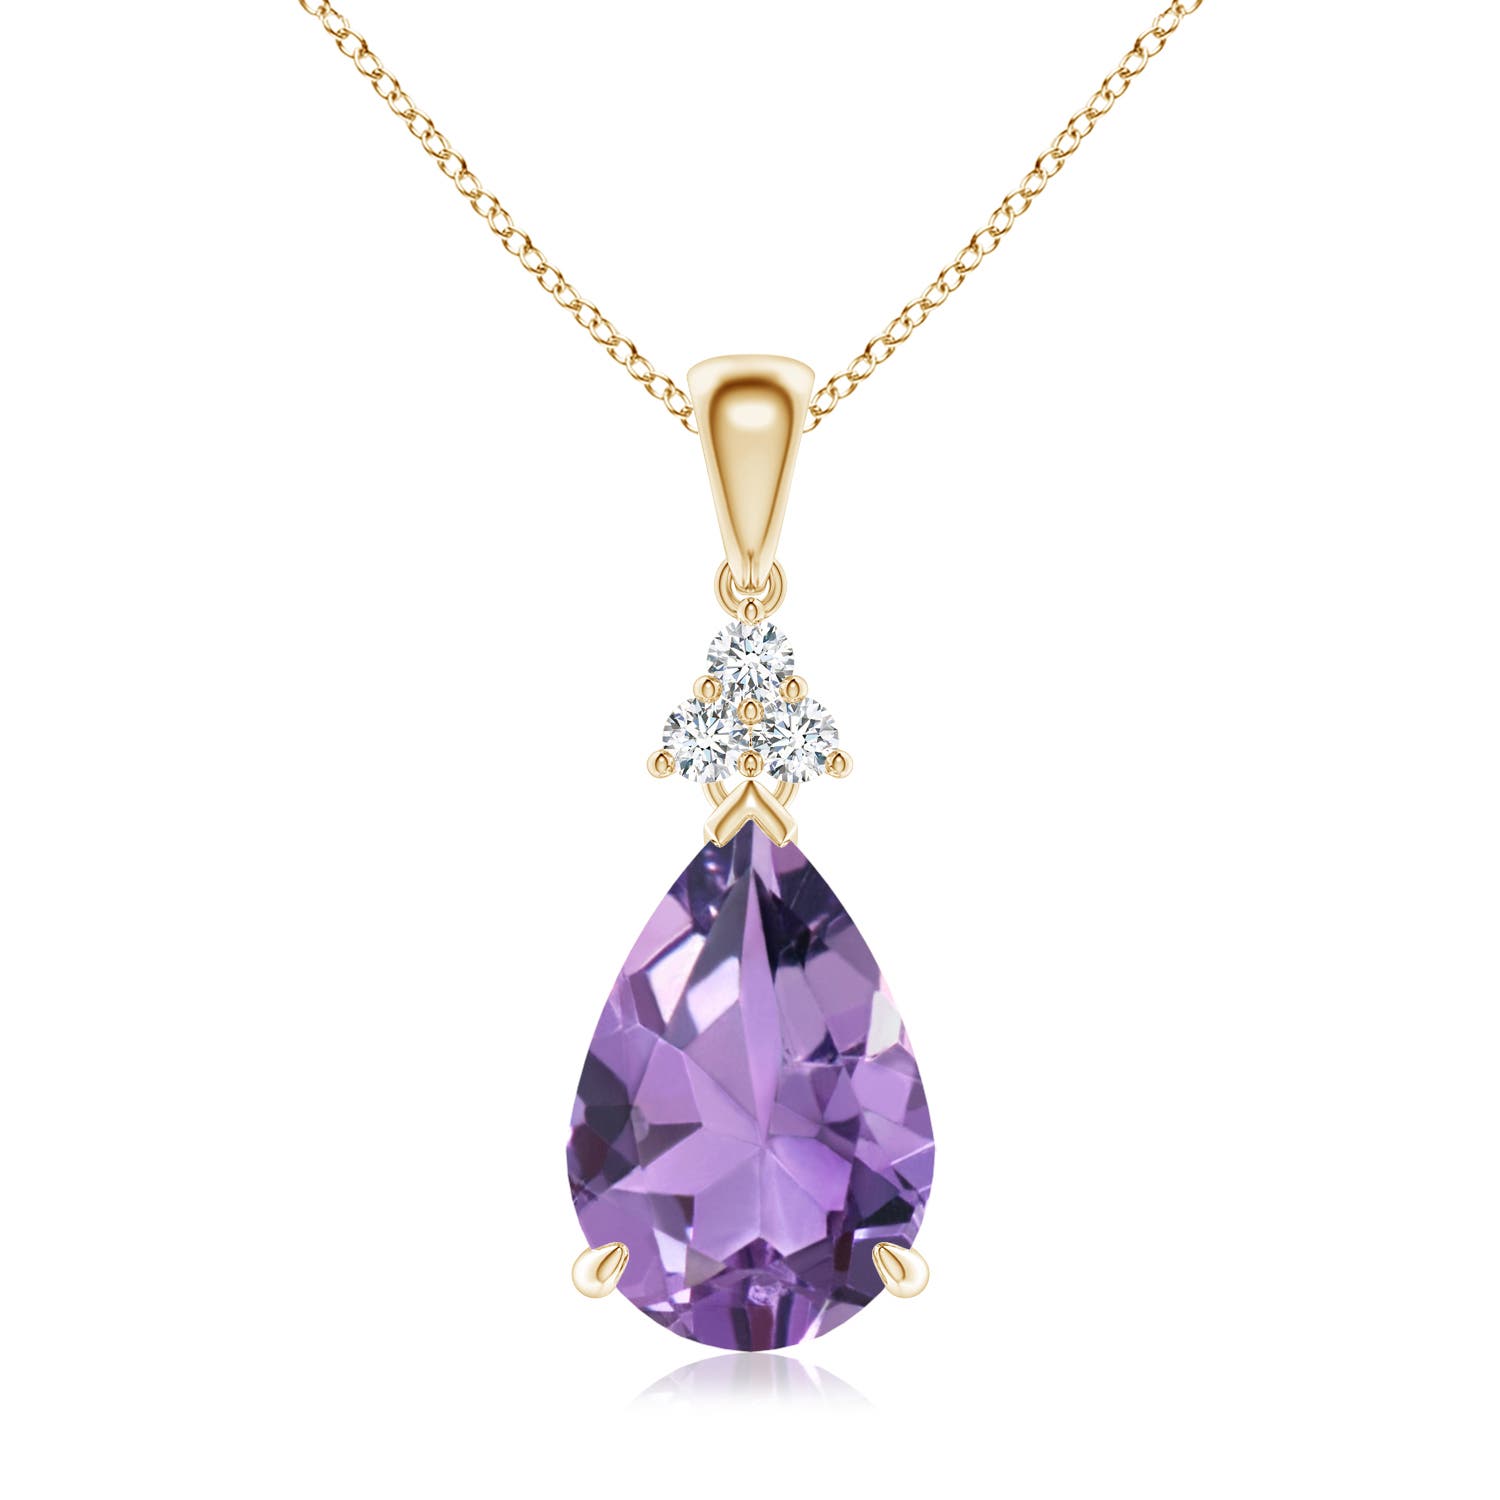 A - Amethyst / 2.71 CT / 14 KT Yellow Gold